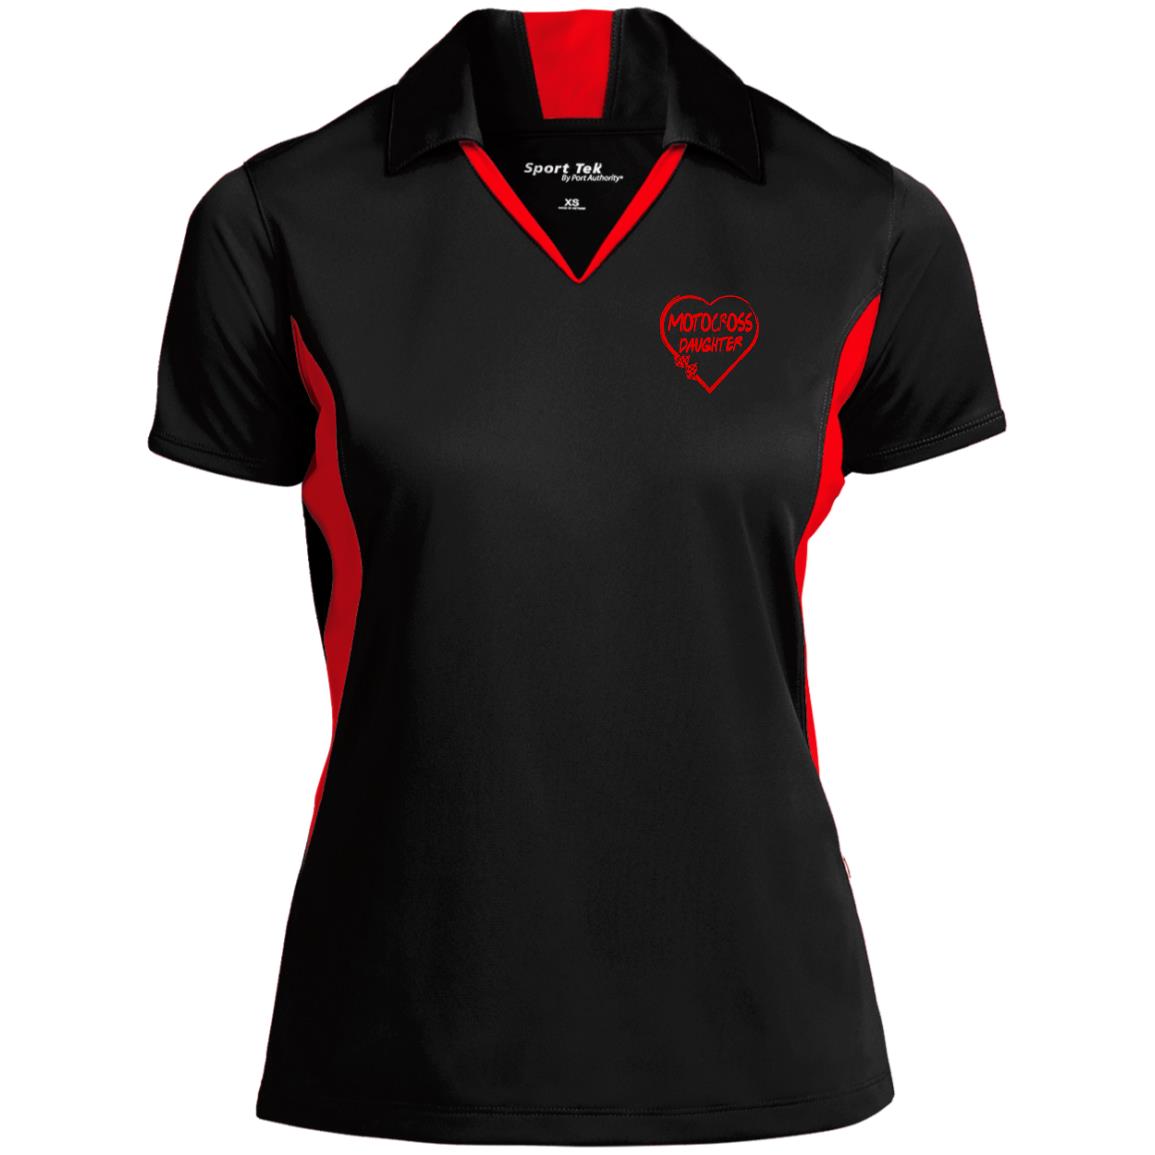 Motocross Daughter Heart Ladies' Colorblock Performance Polo